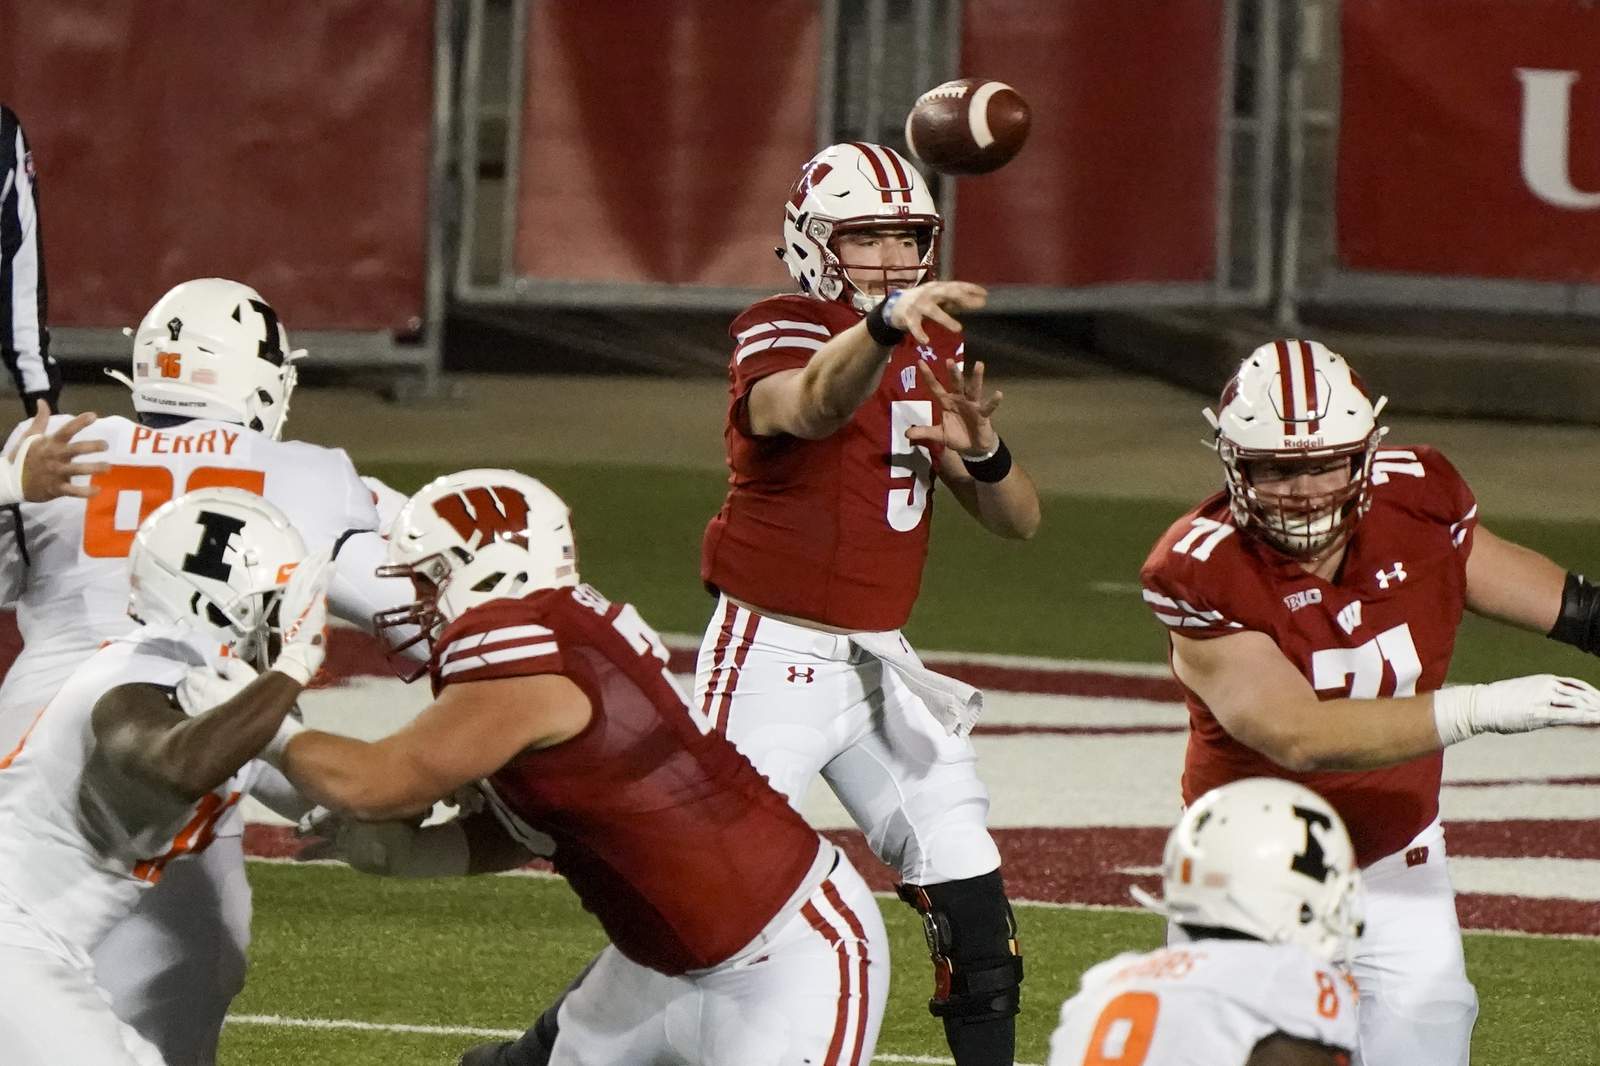 Wisconsin coach stays mum on QB Mertz with Huskers up next